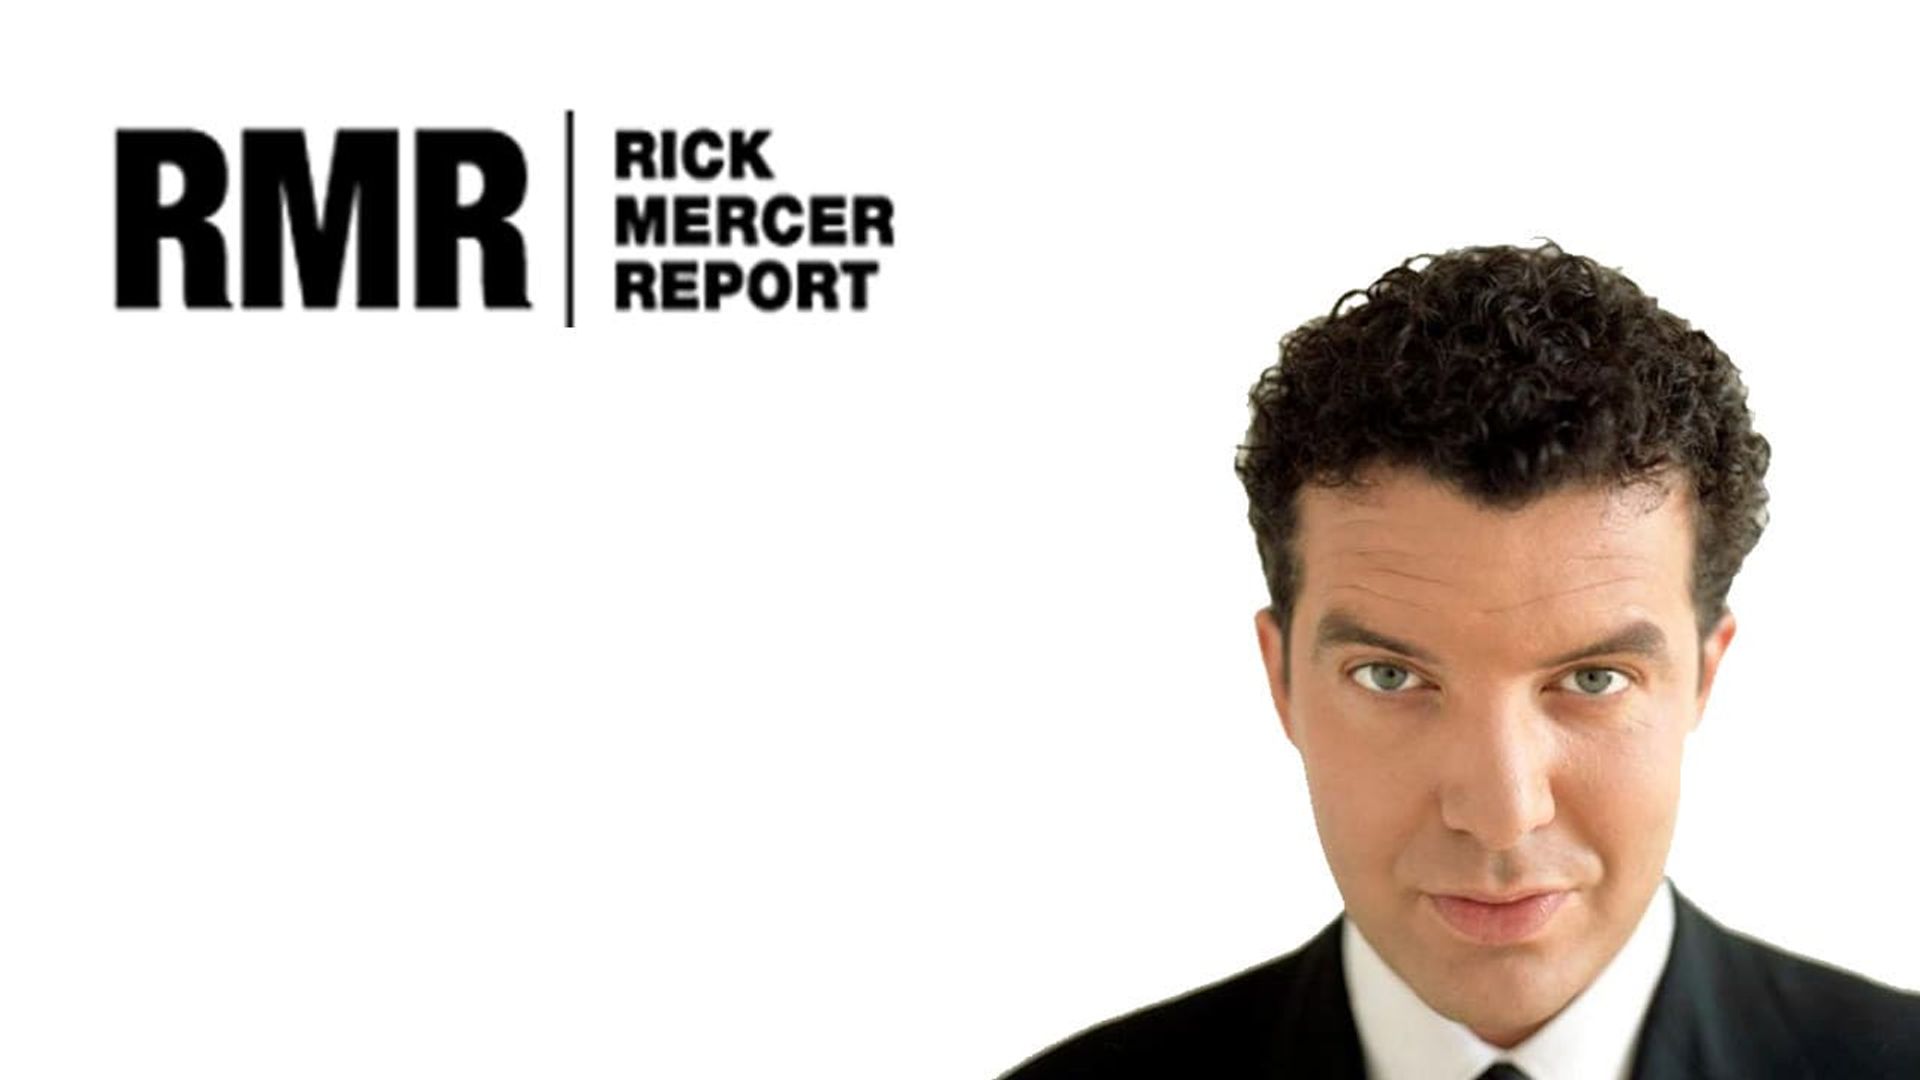 The Rick Mercer Report background